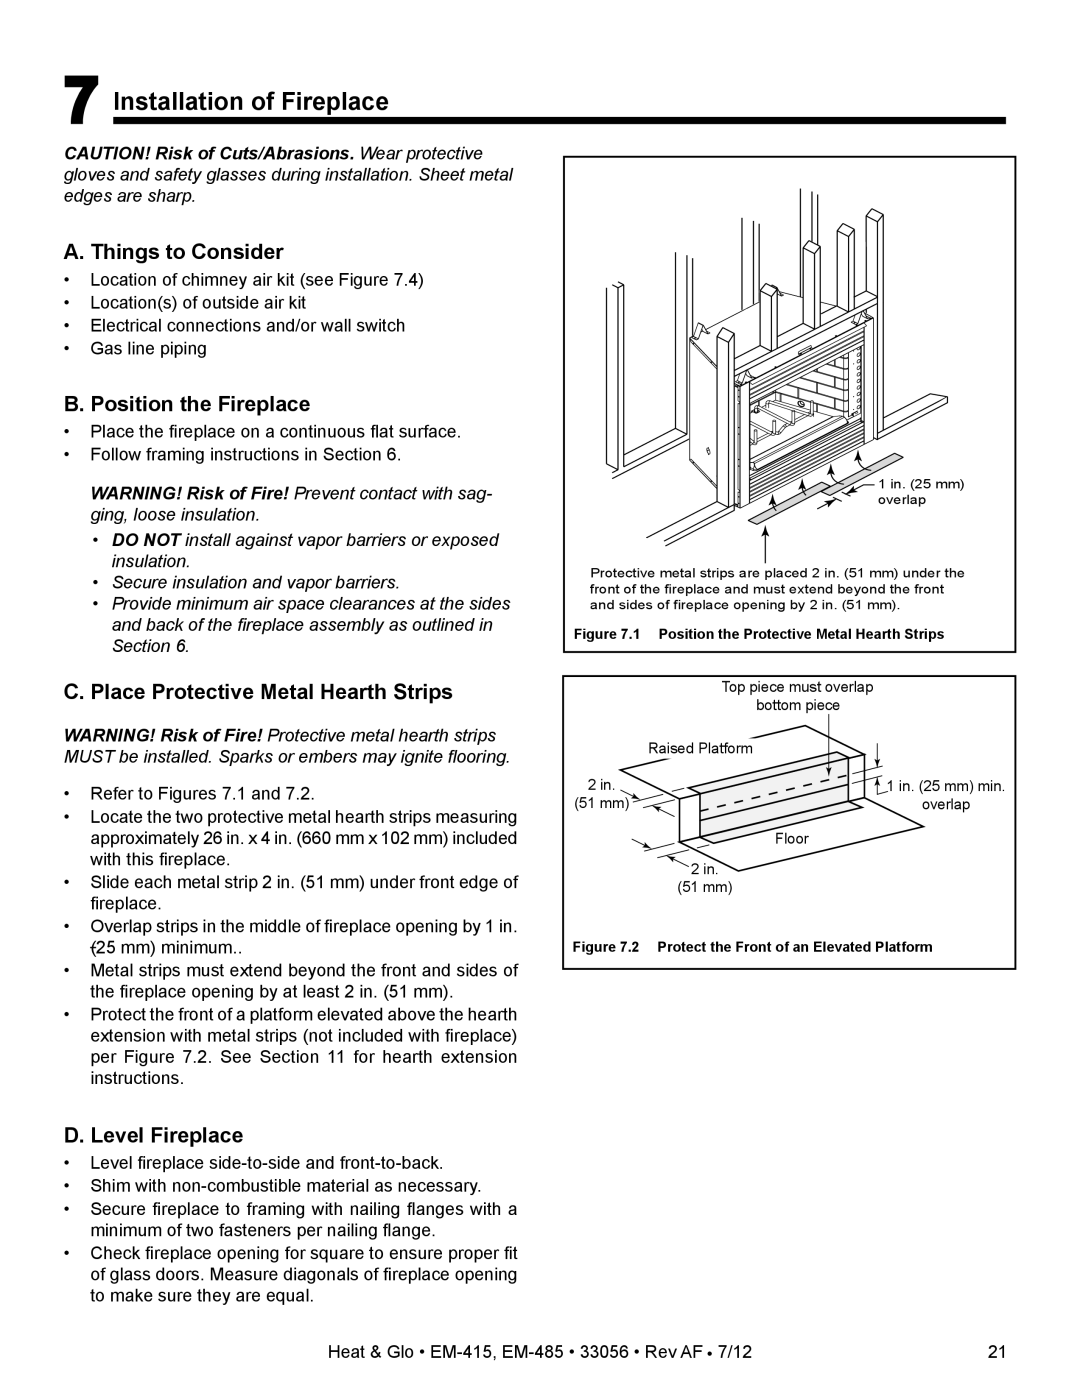 Heat & Glo LifeStyle EM-485T - 42 owner manual 7Installation of Fireplace, A. Things to Consider, B. Position the Fireplace 